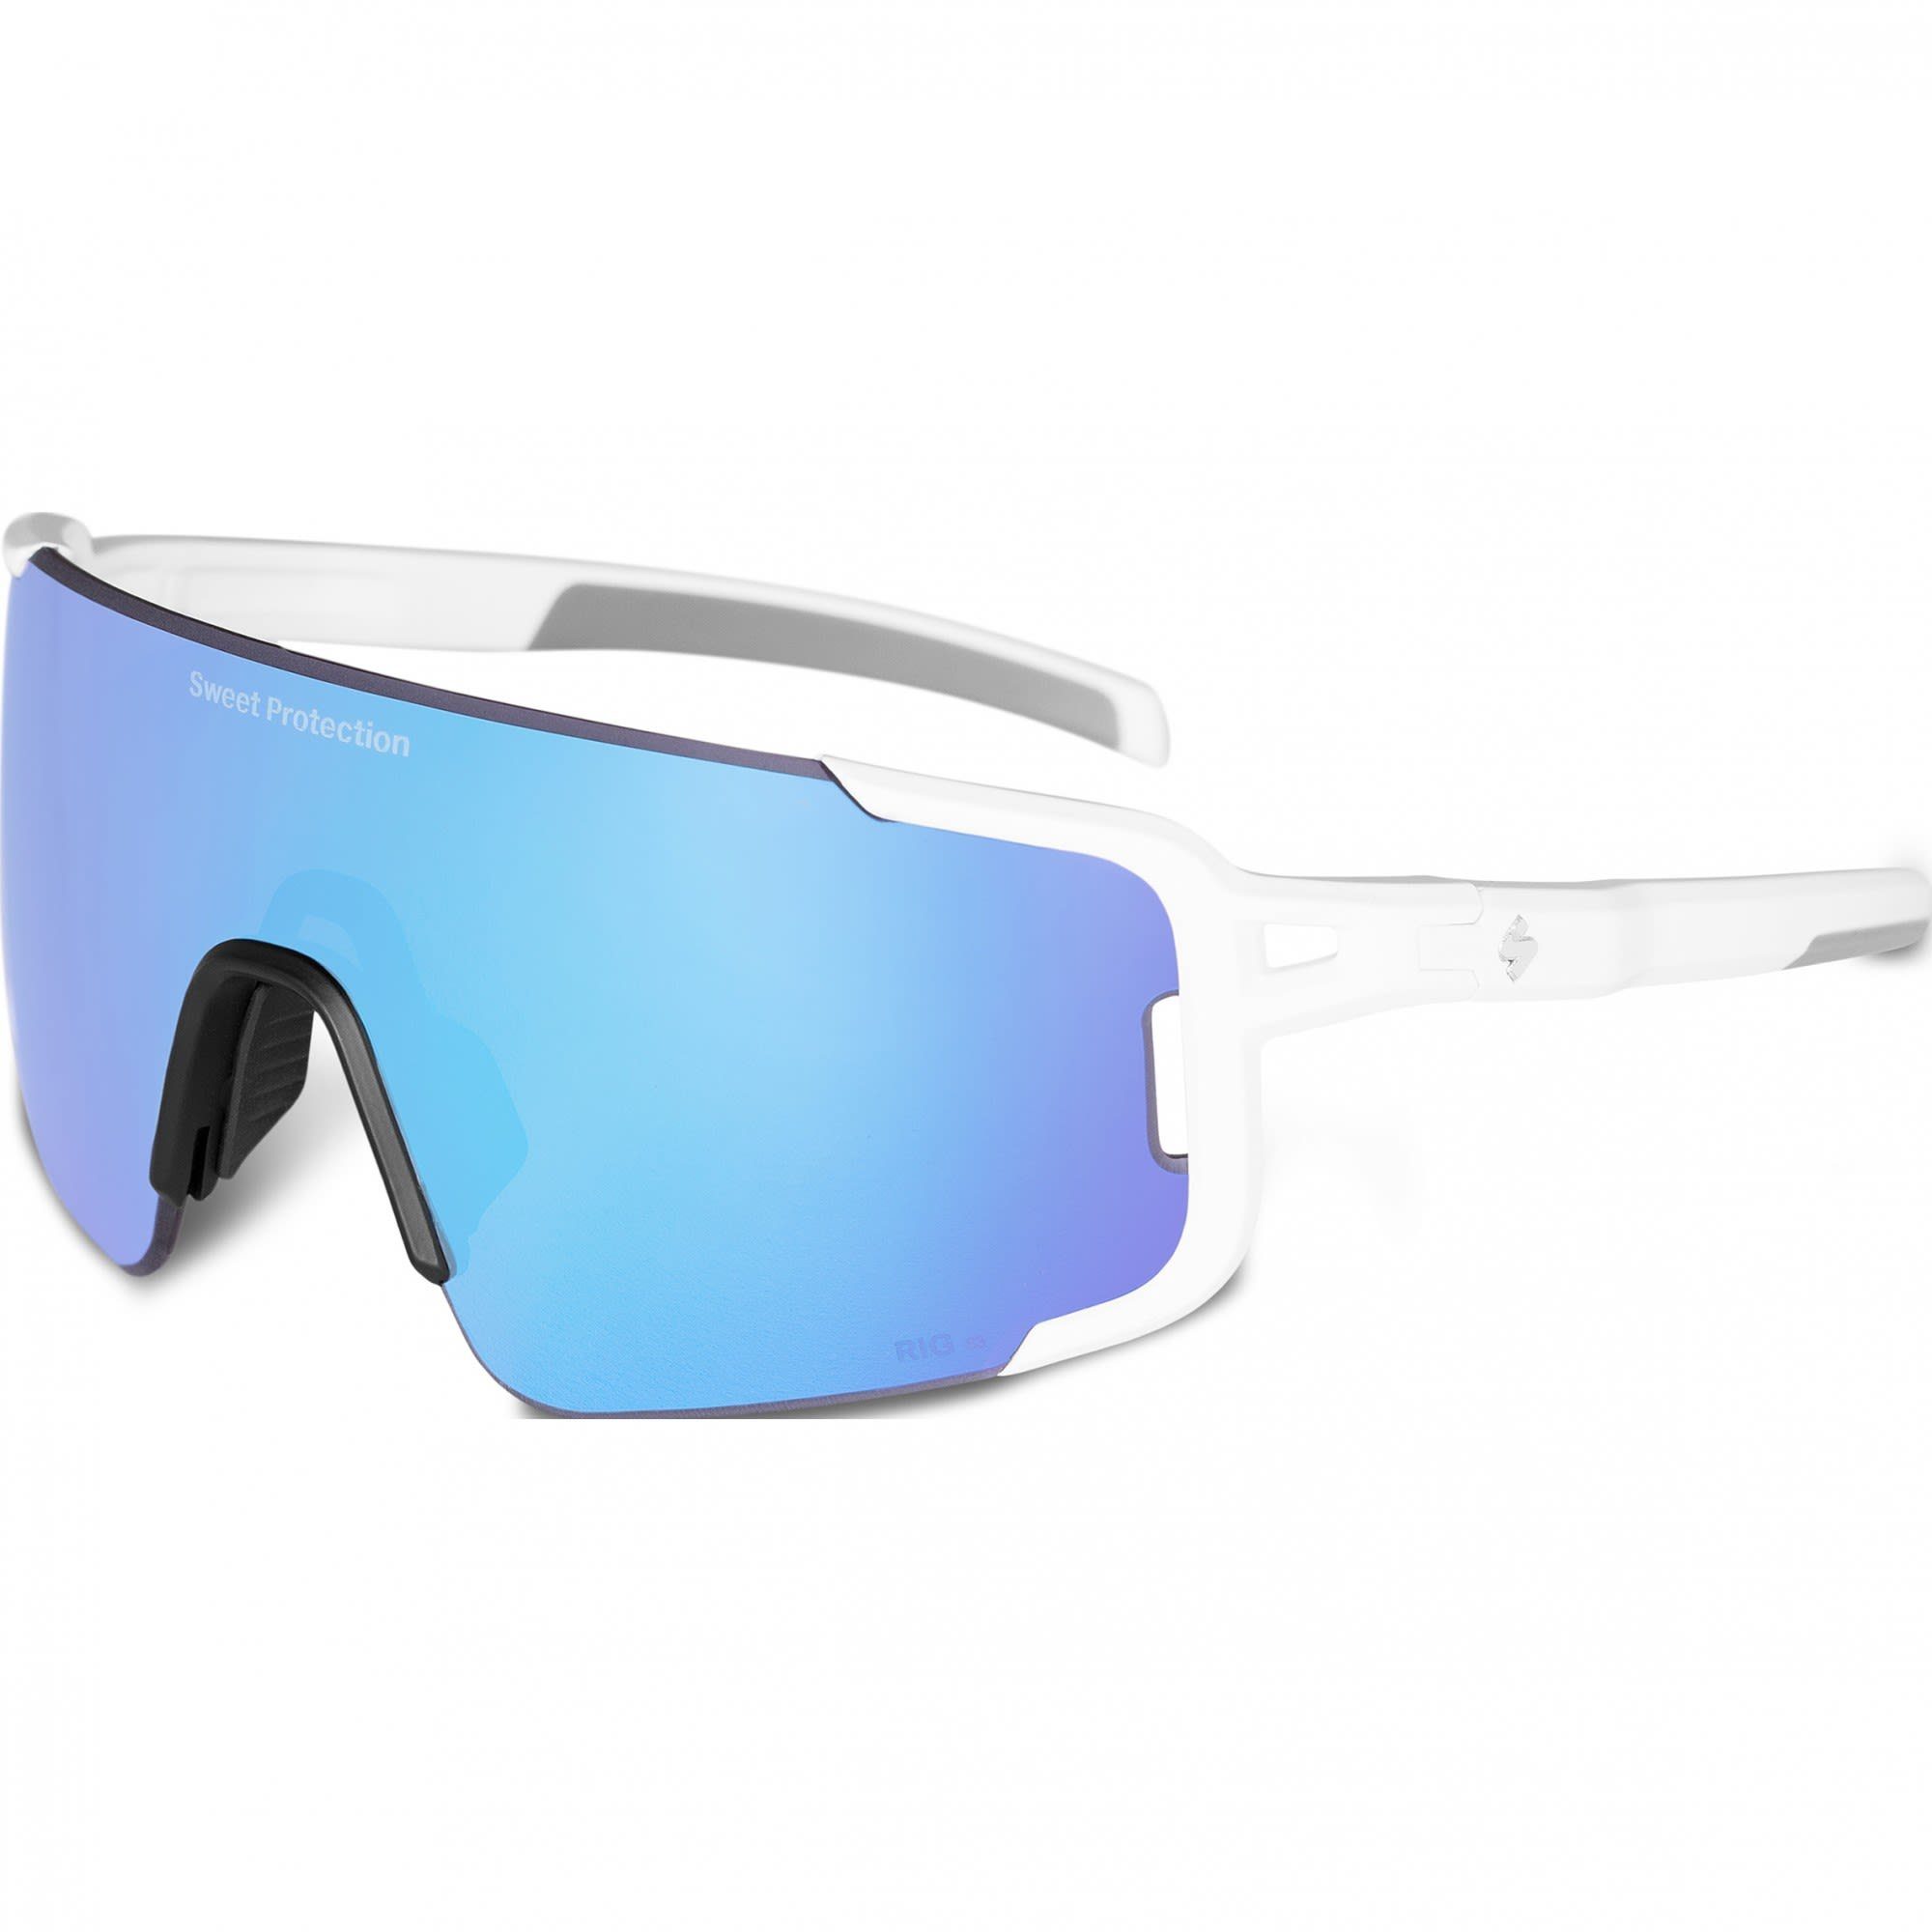 Sweet Protection Fahrradbrille Sweet Protection Ronin Rig Reflect Accessoires RIG Aquamarine - Satin White